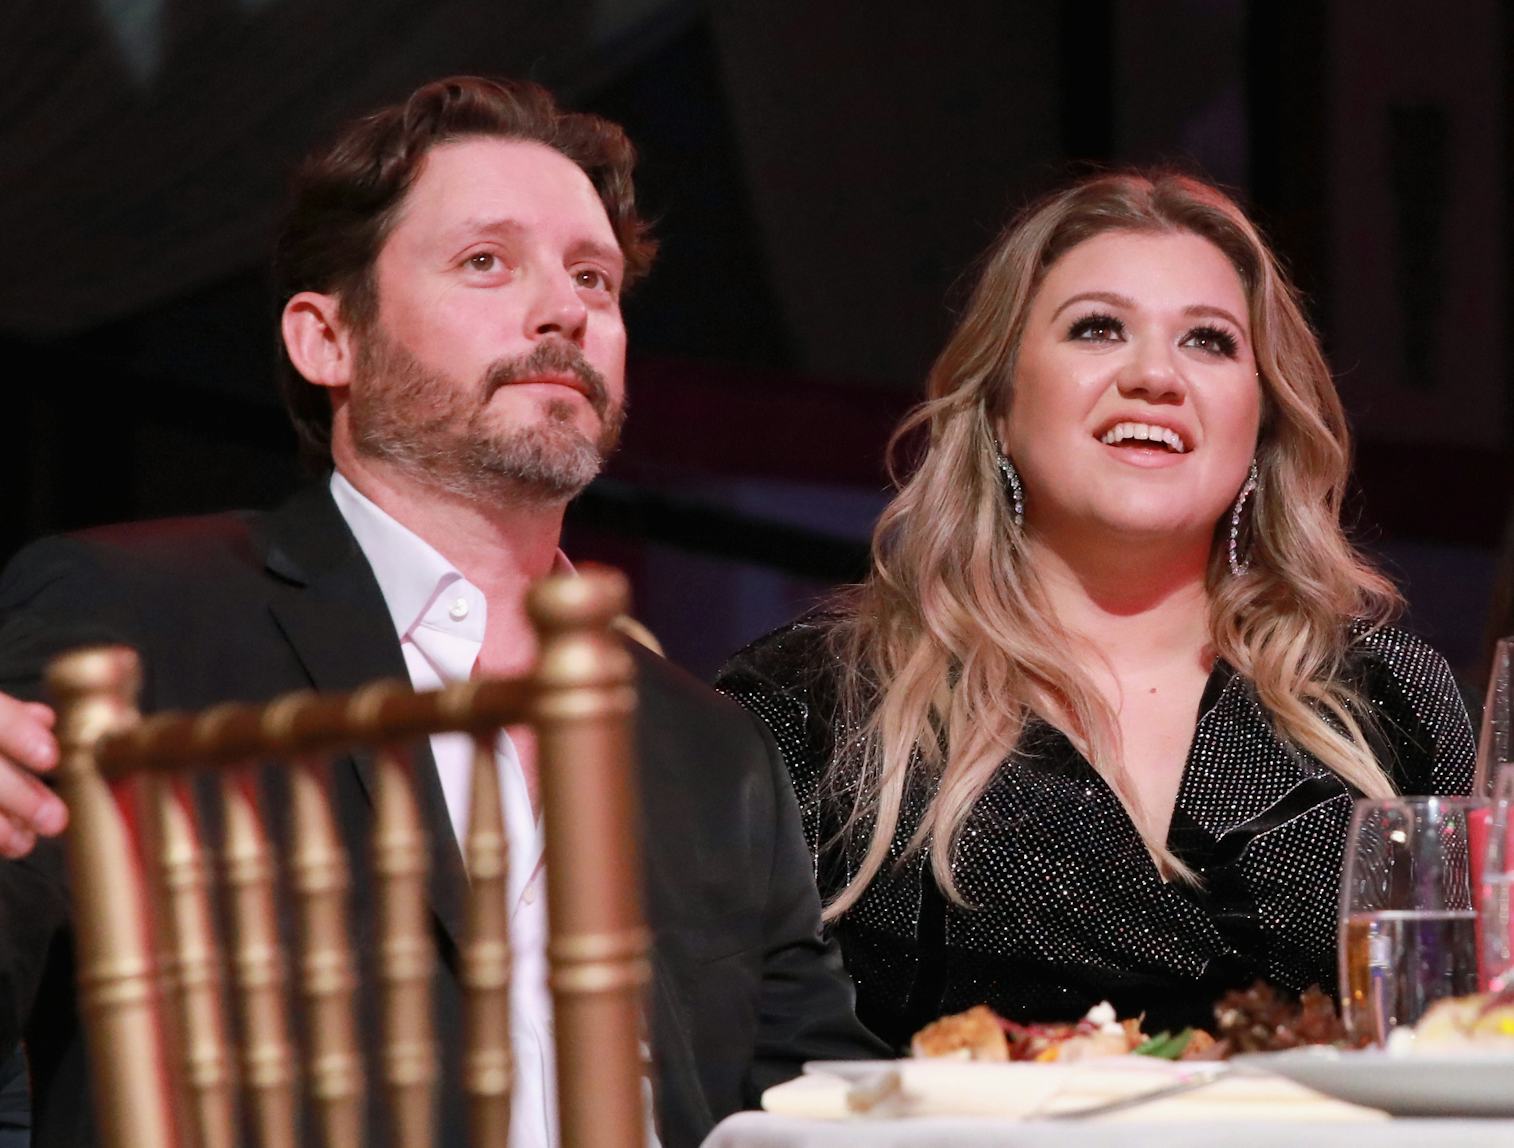 Who Is Kelly Clarkson's Husband? Brandon Blackstock Is Also In The